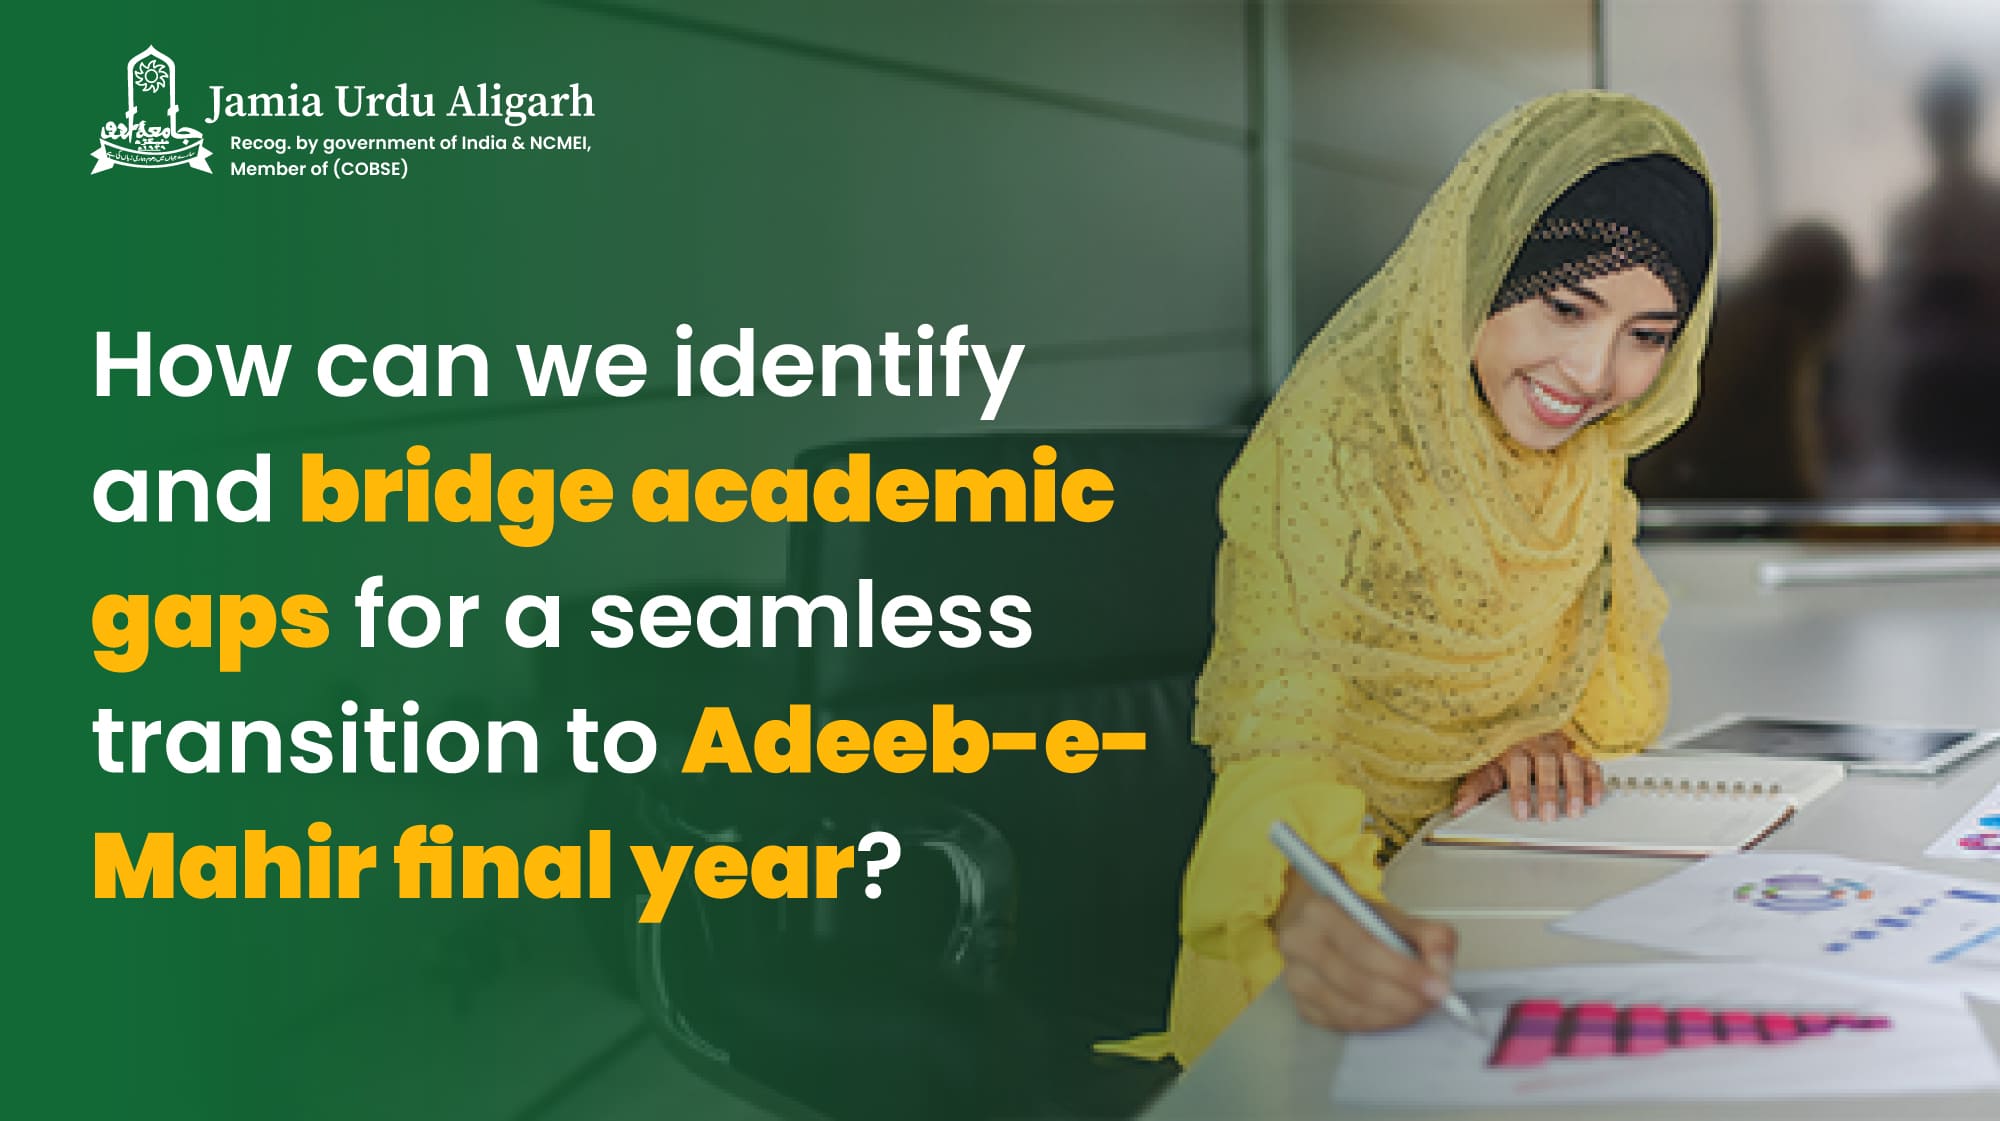 How can we identify and bridge academic gaps for a seamless transition to Adeeb-e-Mahir final year?